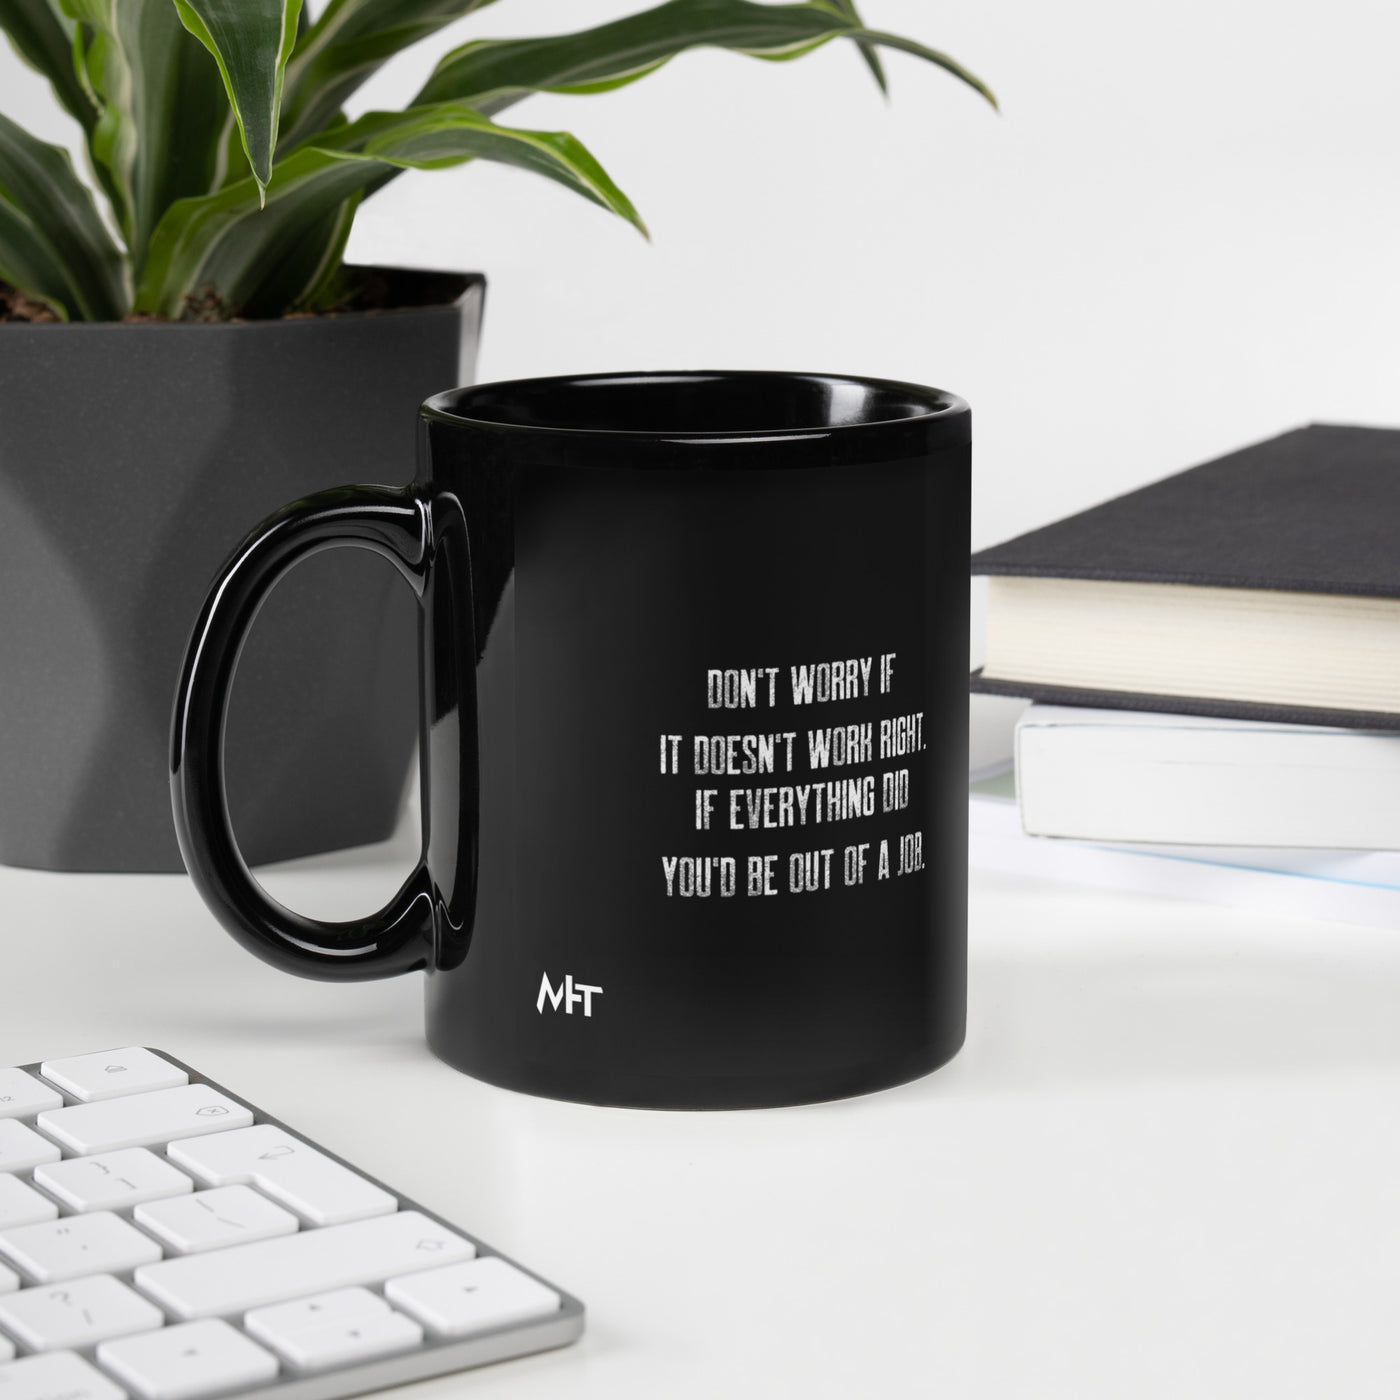 Don't worry if it doesn't work right: if everything did, you would be out of your job V2 - Black Glossy Mug